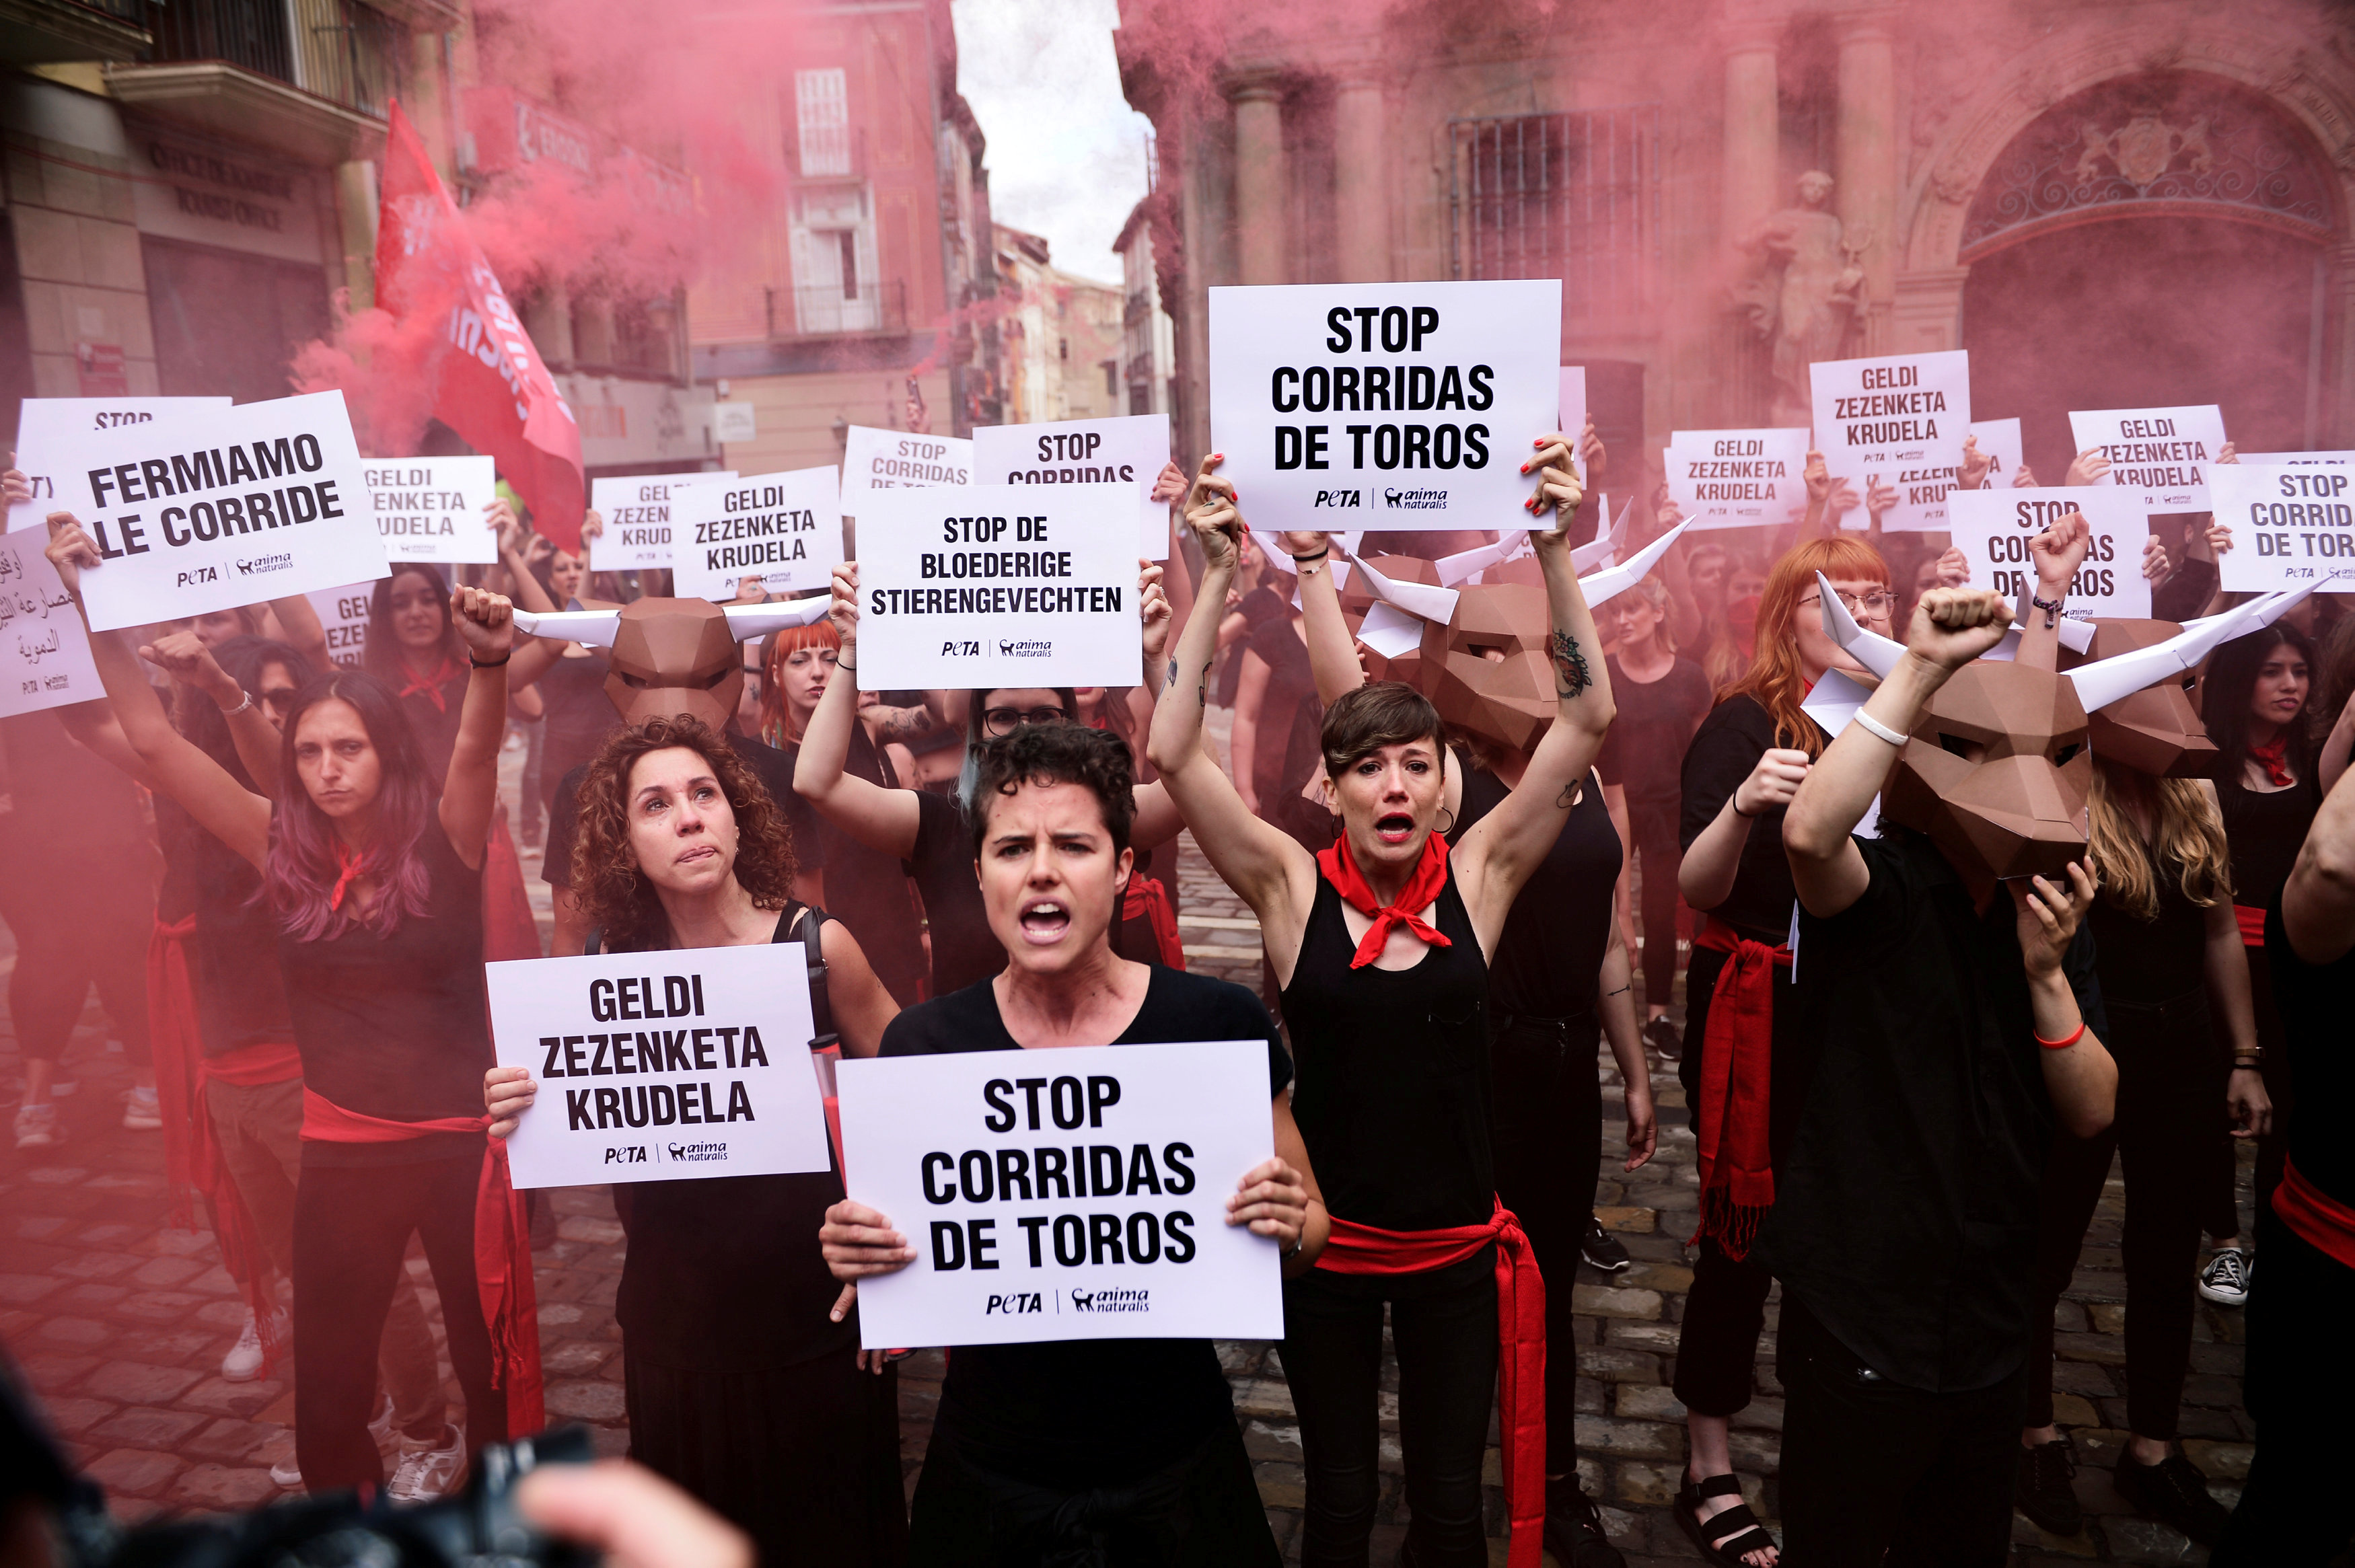 Protesters take part in a demonstration against bullfighting before the start of the San Fermin festival in Pamplona, Spain, July 5, 2018. REUTERS/Vincent West